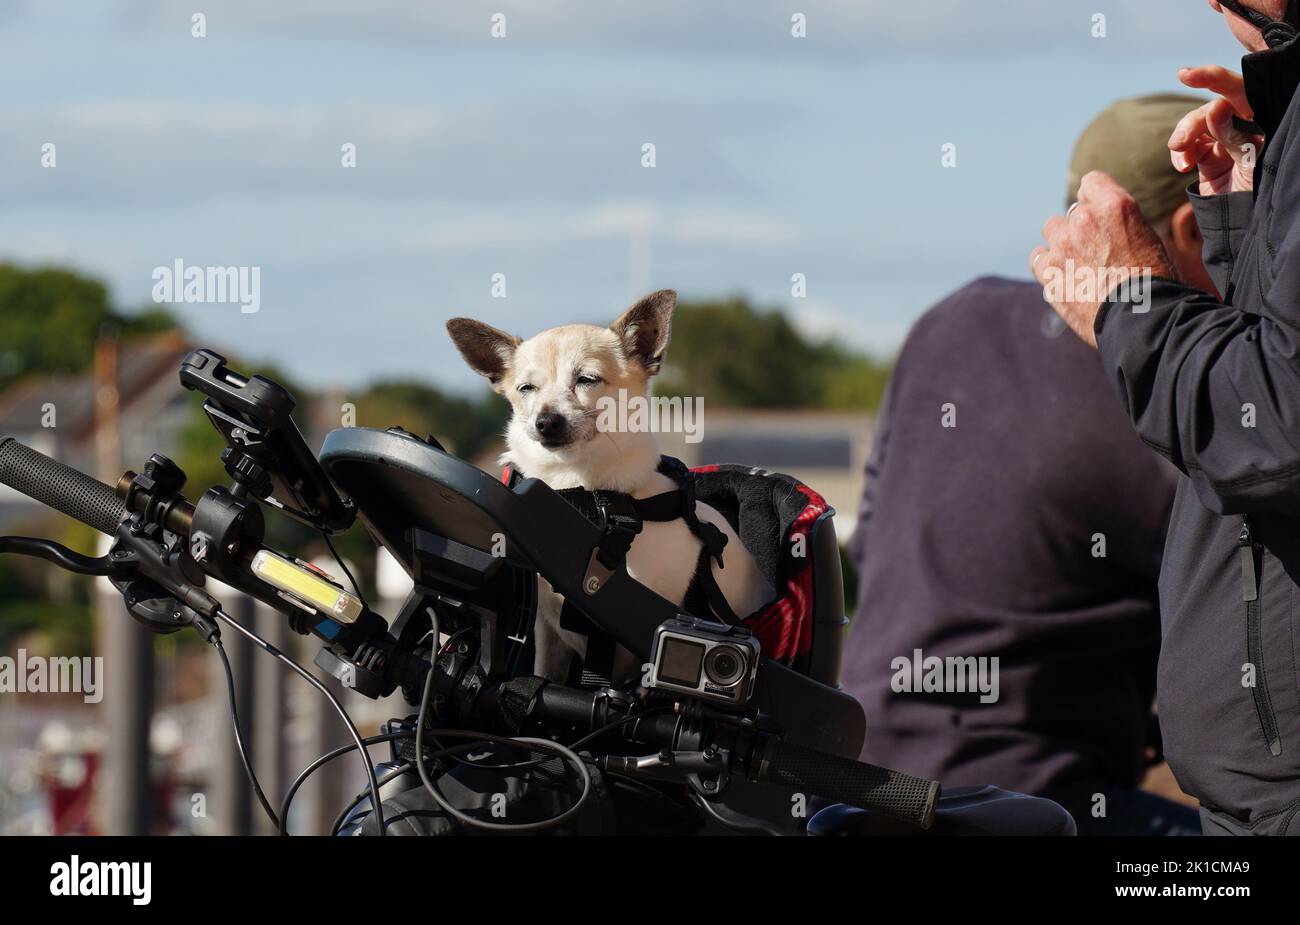 A happy, small dog with big ears (toy dog, Chihuahua) is taken out on a cycle ride, using a child's seat Stock Photo